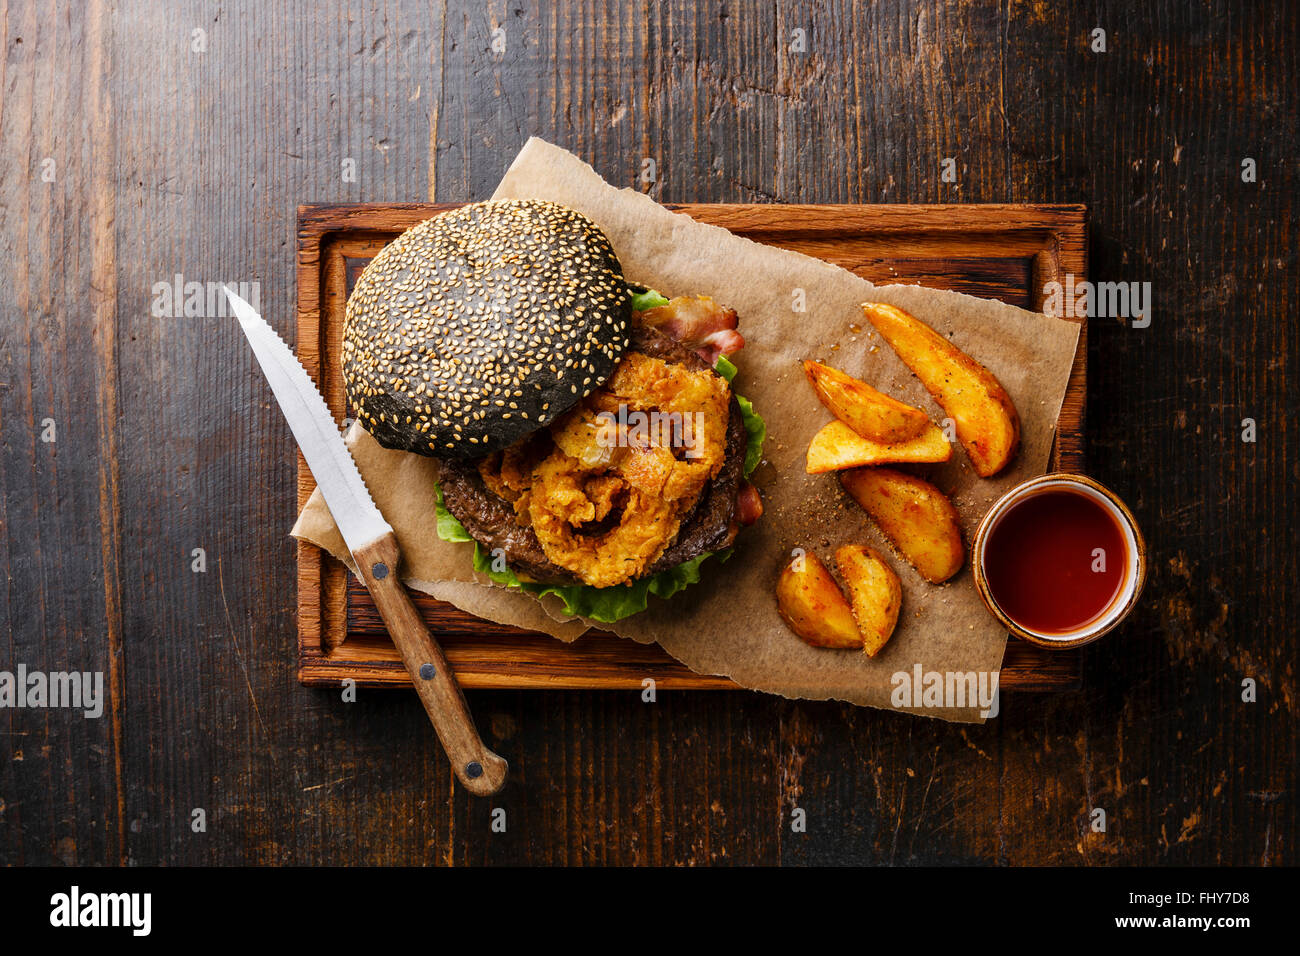 Black burger with sesame seed bun meat bacon onion fries rings and potato wedges on dark wooden background Stock Photo